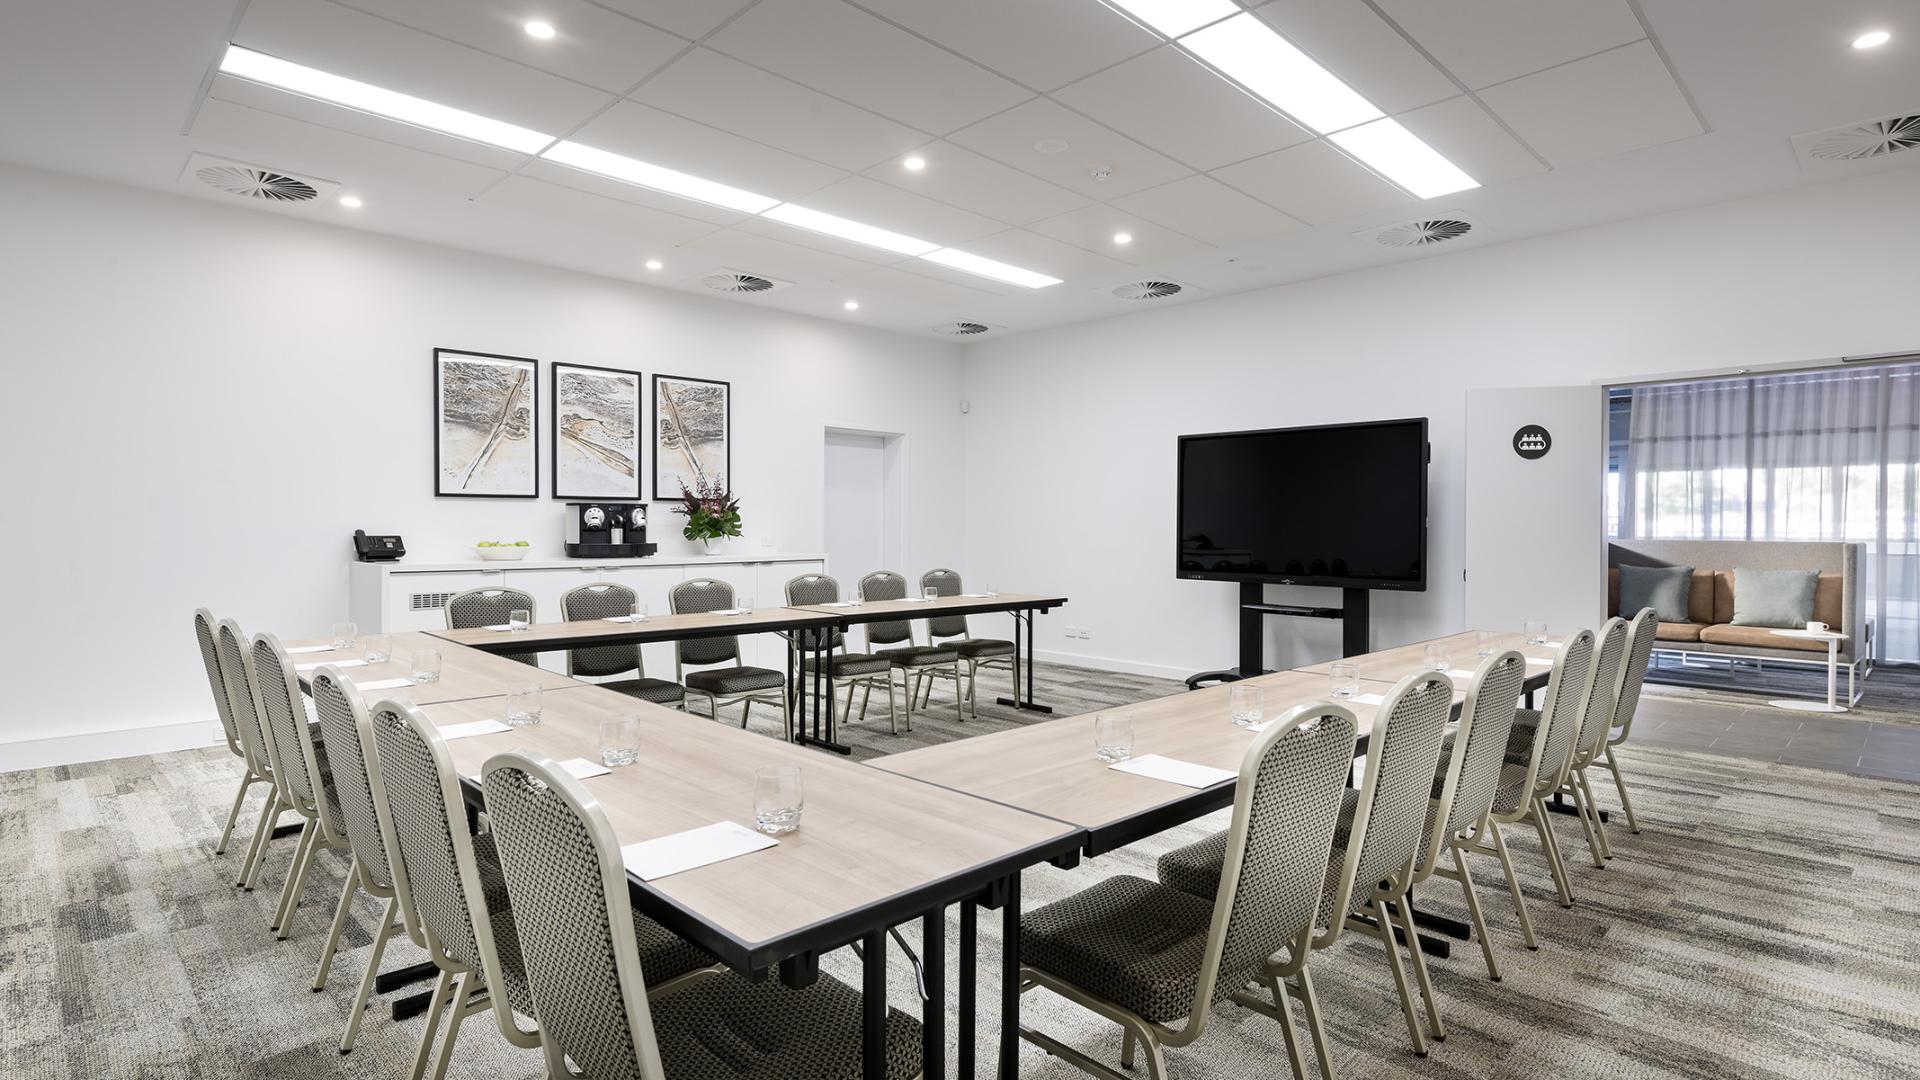 Meeting Rooms for Hire in Perth